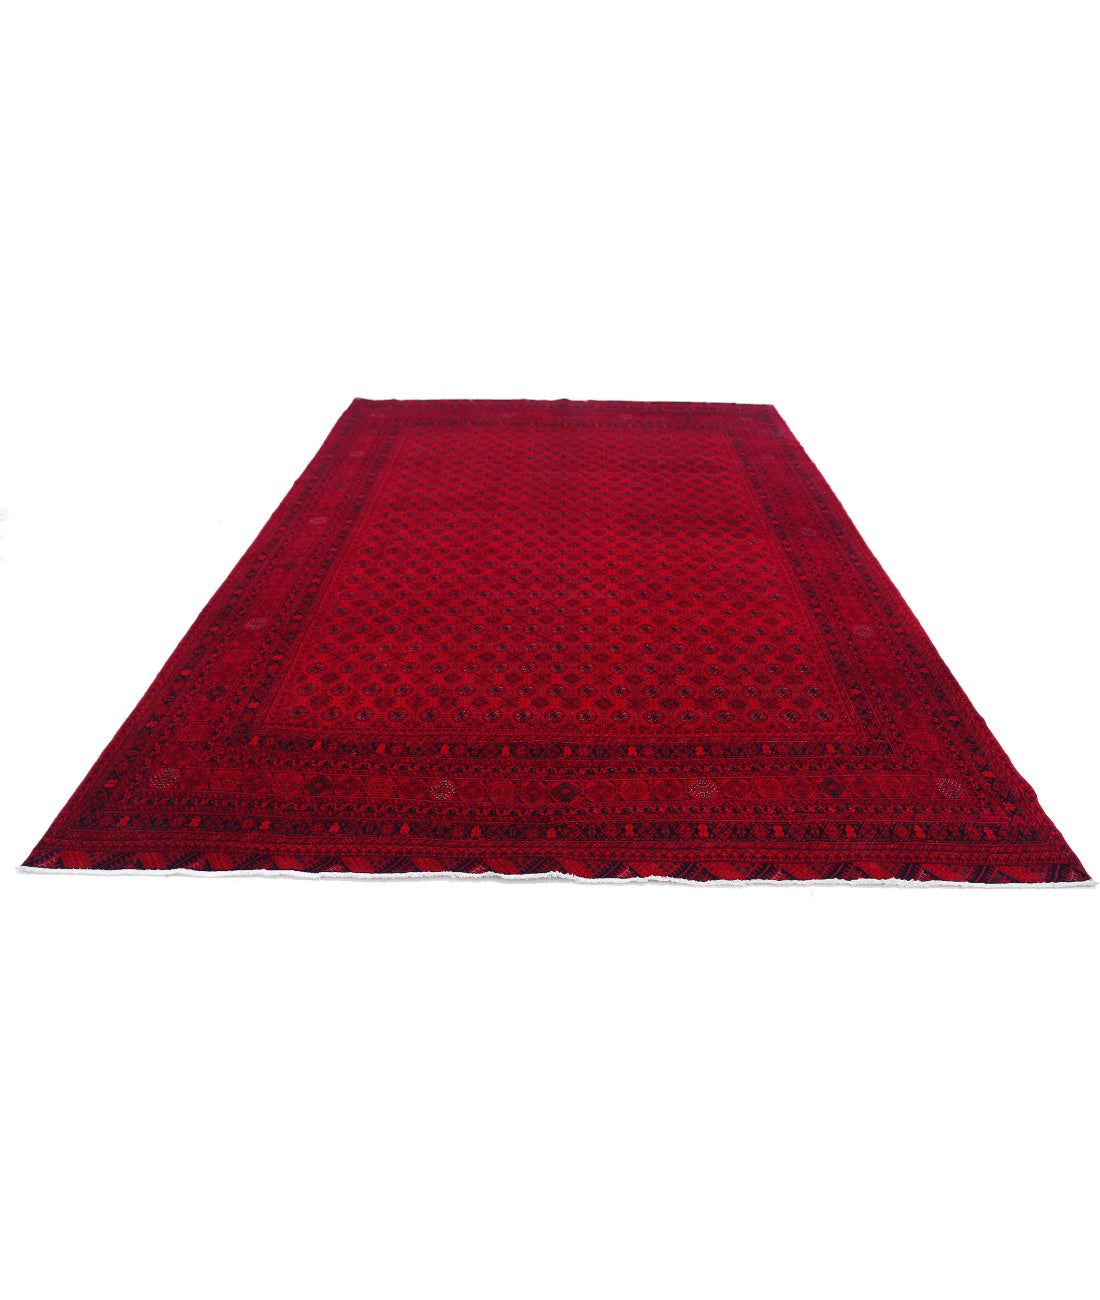 Hand Knotted Afghan Beljik Wool Rug - 7'9'' x 10'8'' 7'9'' x 10'8'' (233 X 320) / Red / Red